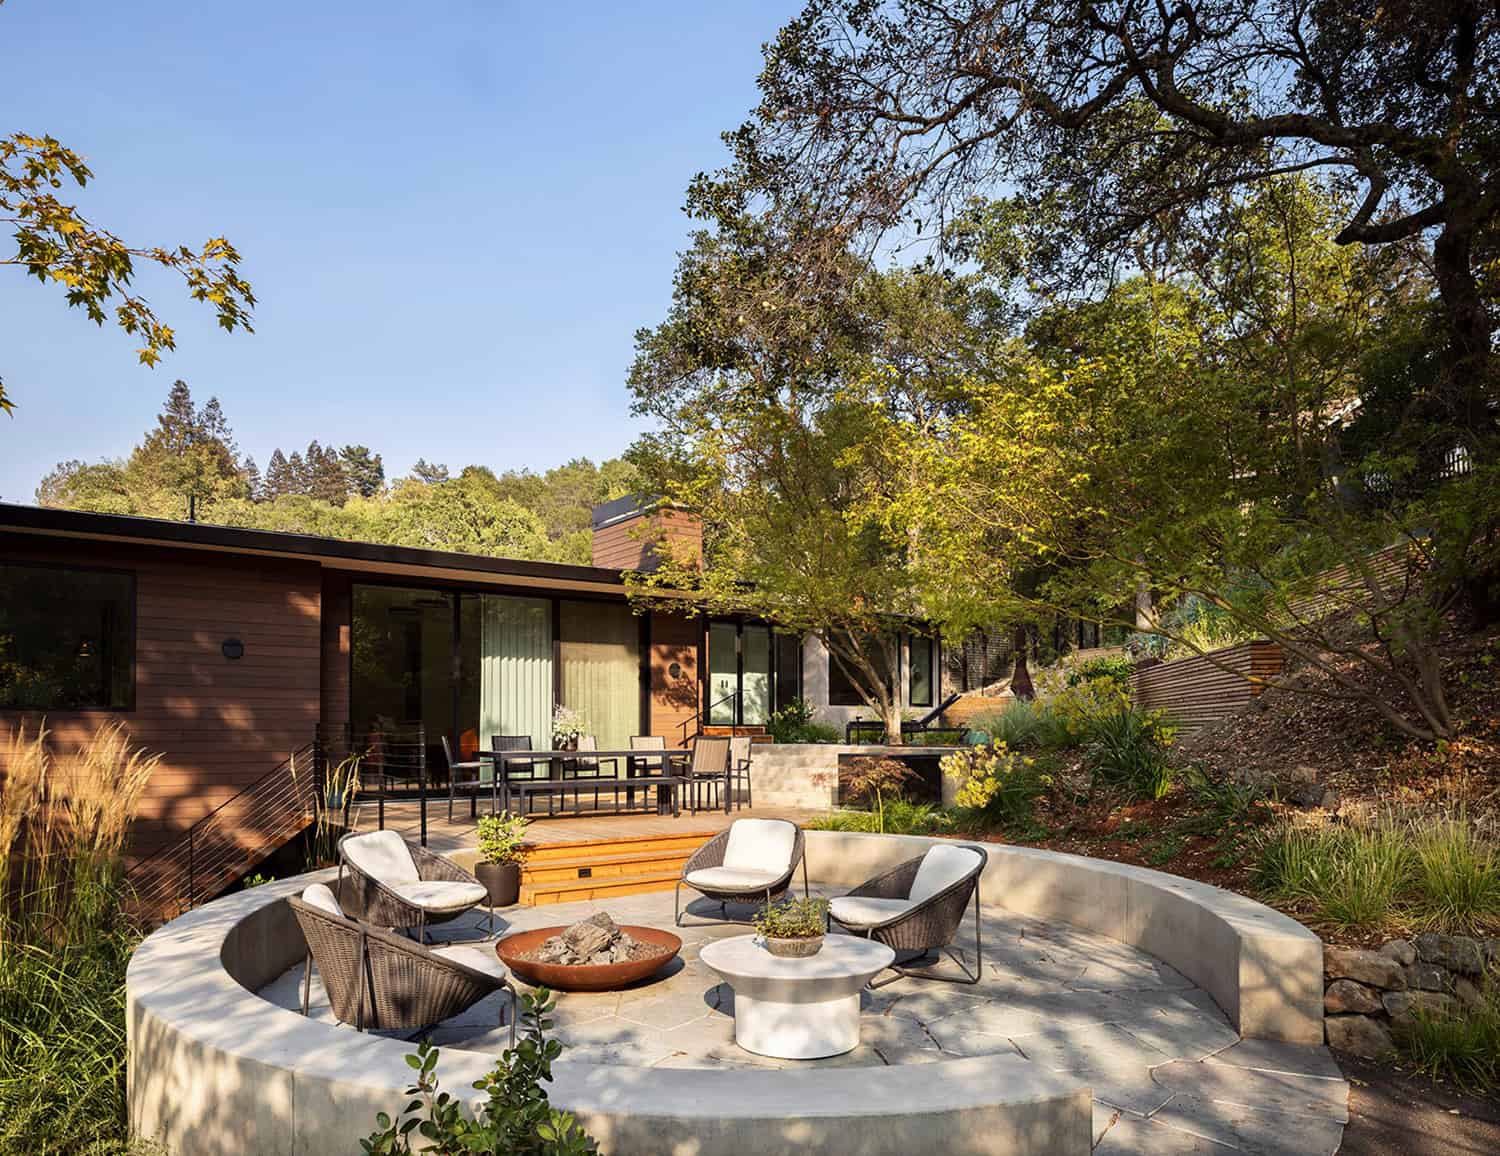 A midcentury modern home in California gets a beautiful remodel